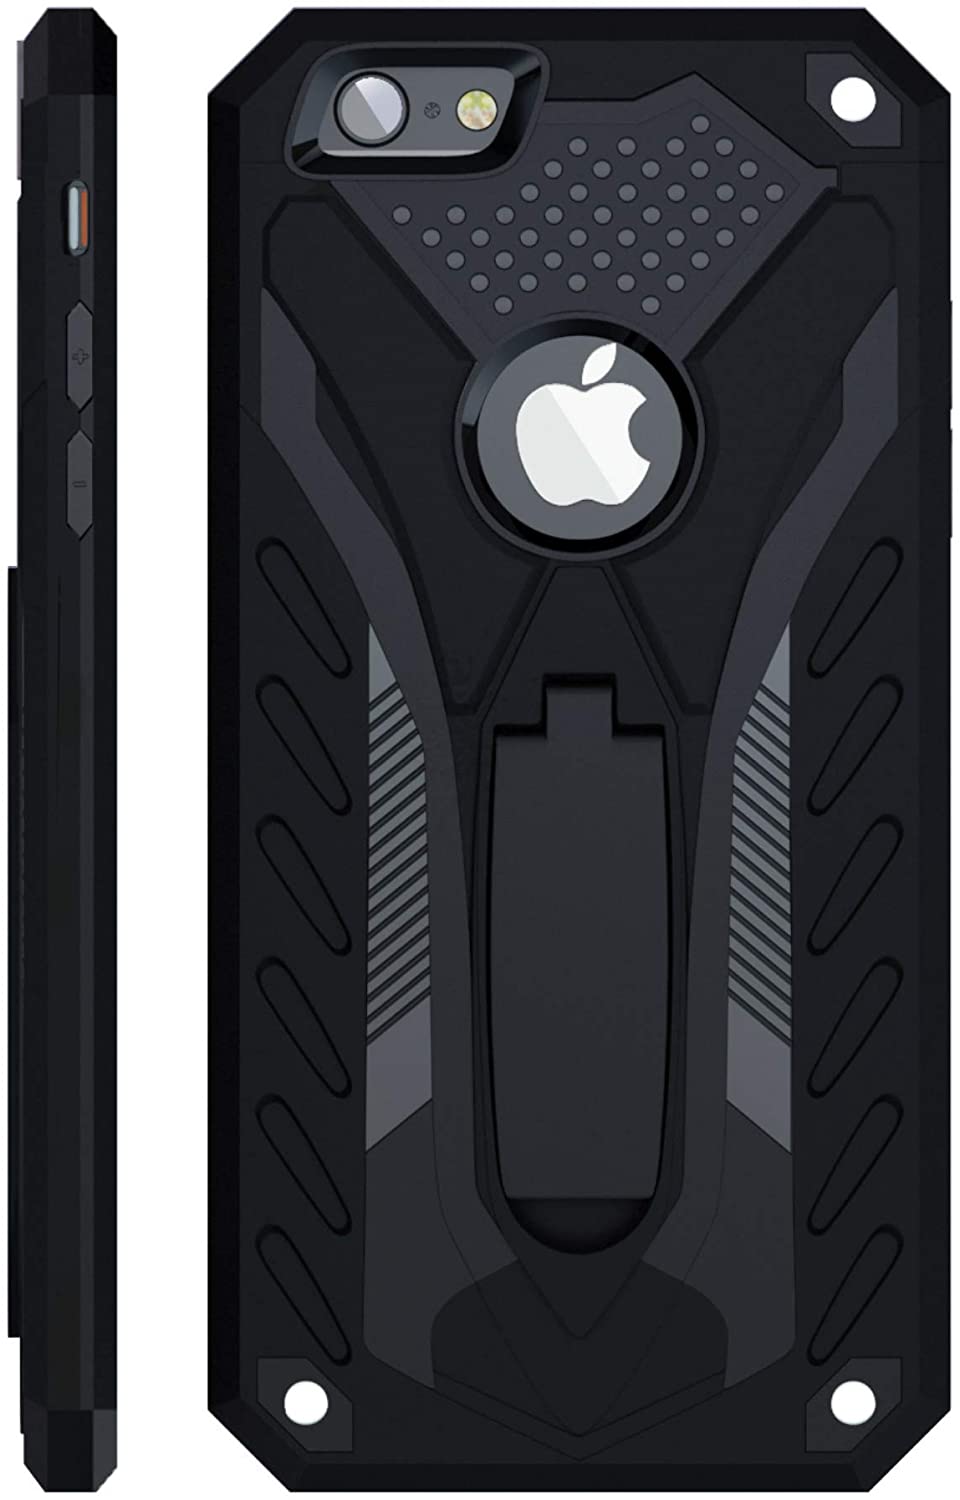 iPhone 6 / iPhone 6s Hard Case with Kickstand Black